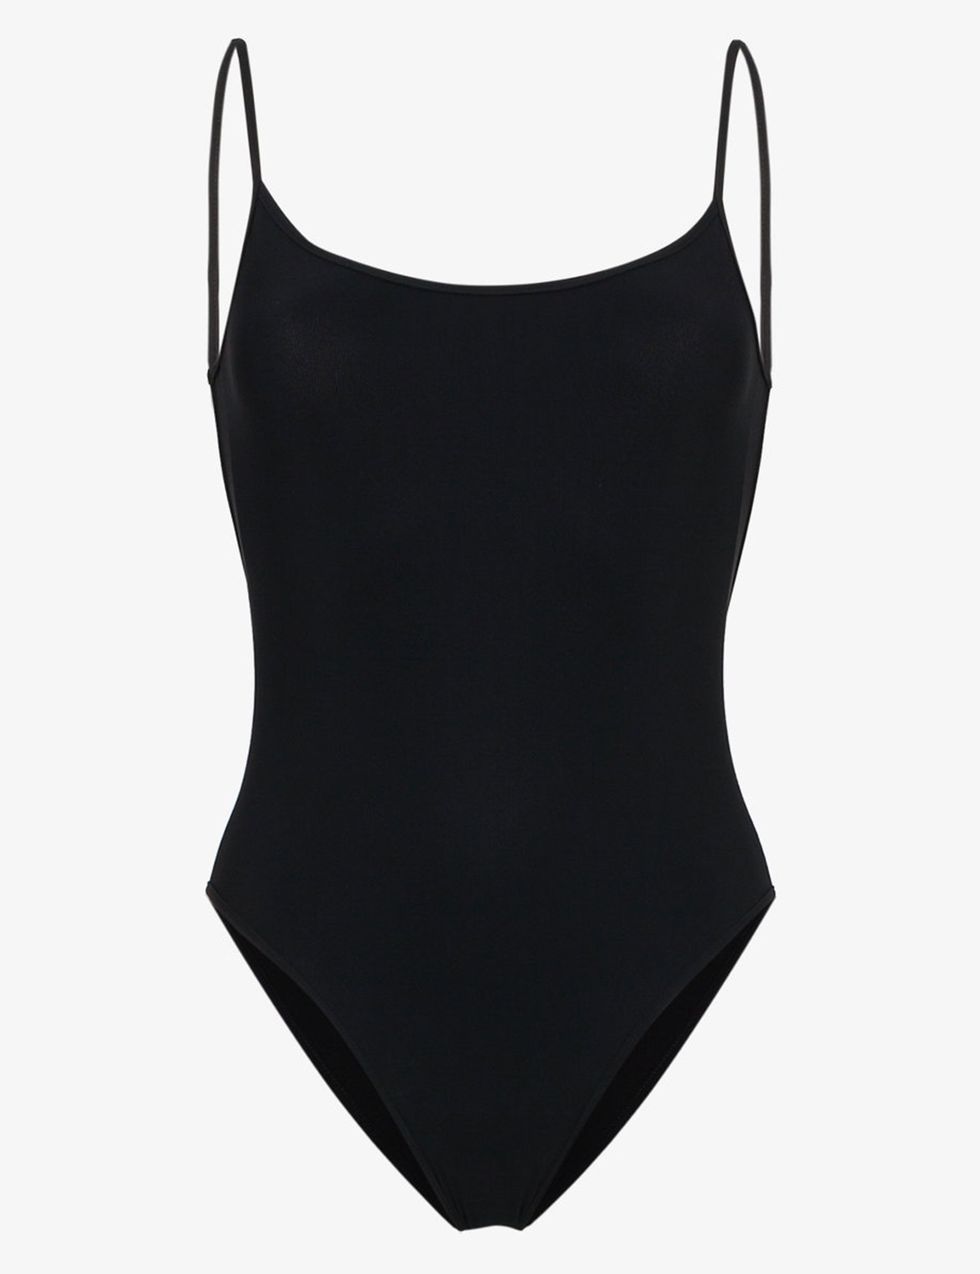 The 8 best black swimsuits to buy this summer – Black swimming costumes ...